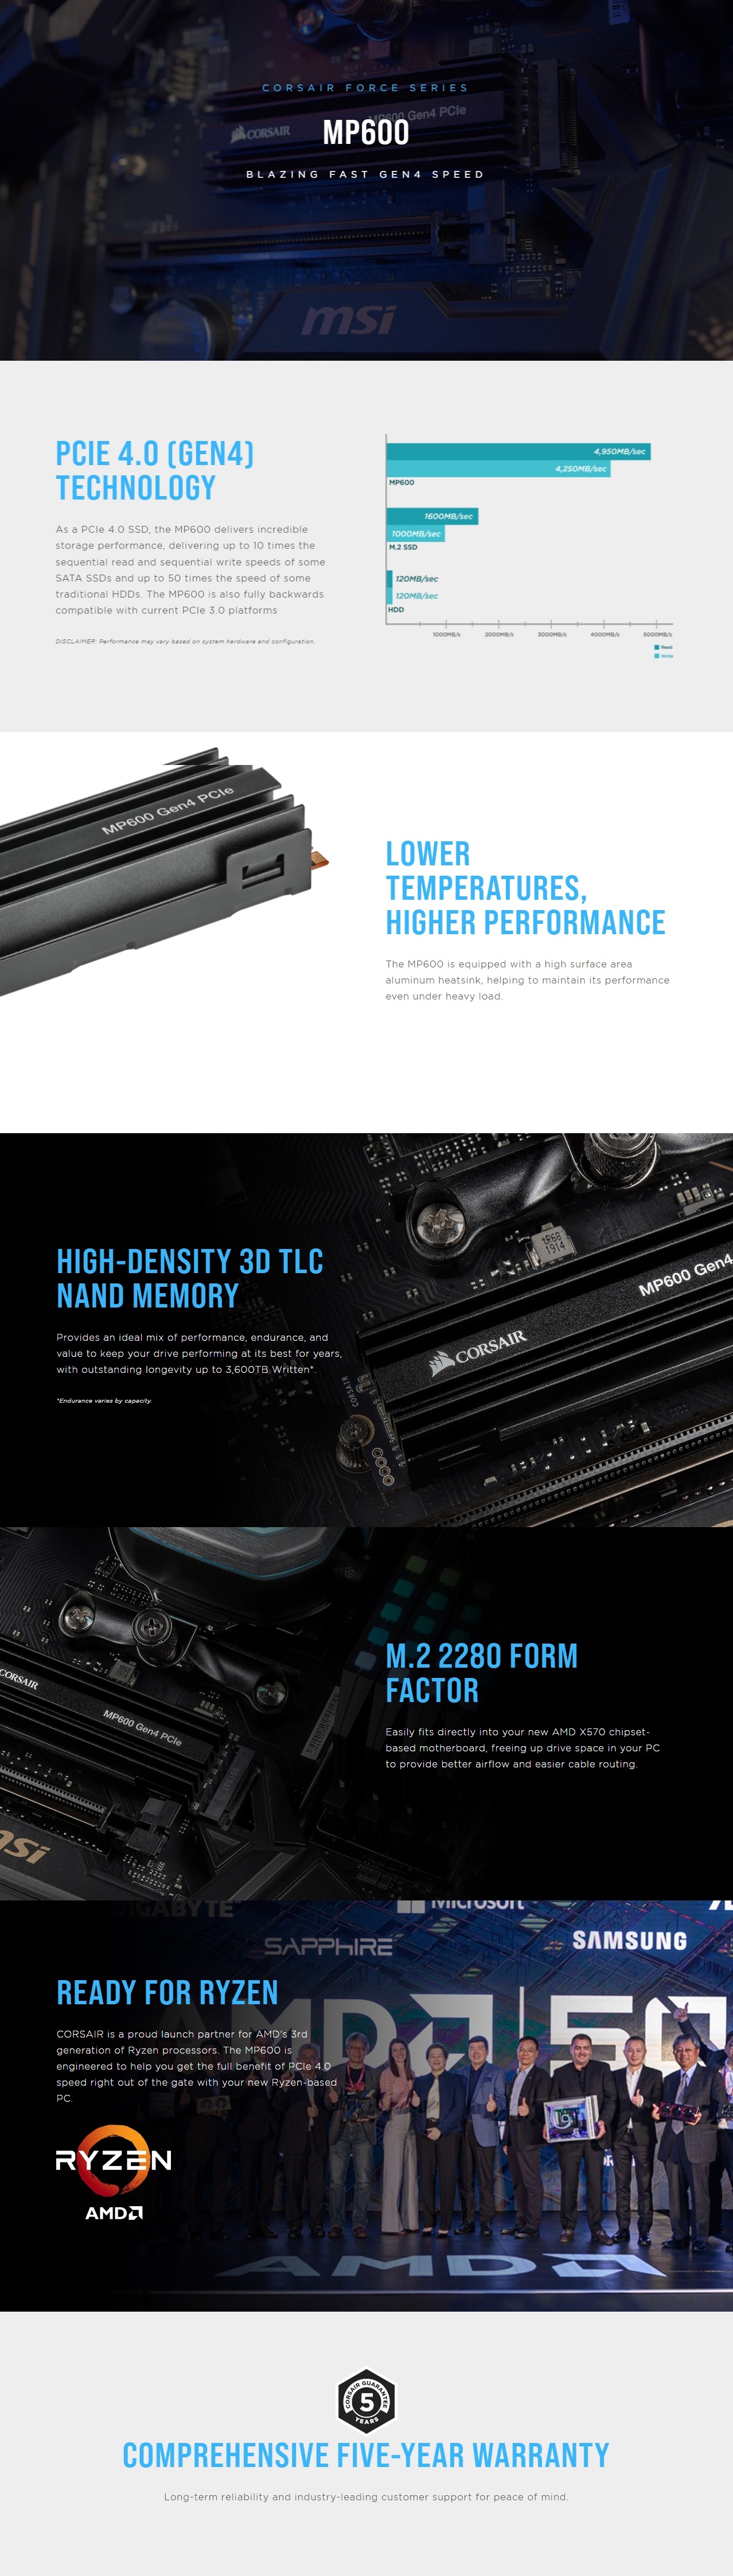 A large marketing image providing additional information about the product Corsair MP600 Force PCIe Gen4 NVMe M.2 SSD - 1TB - Additional alt info not provided